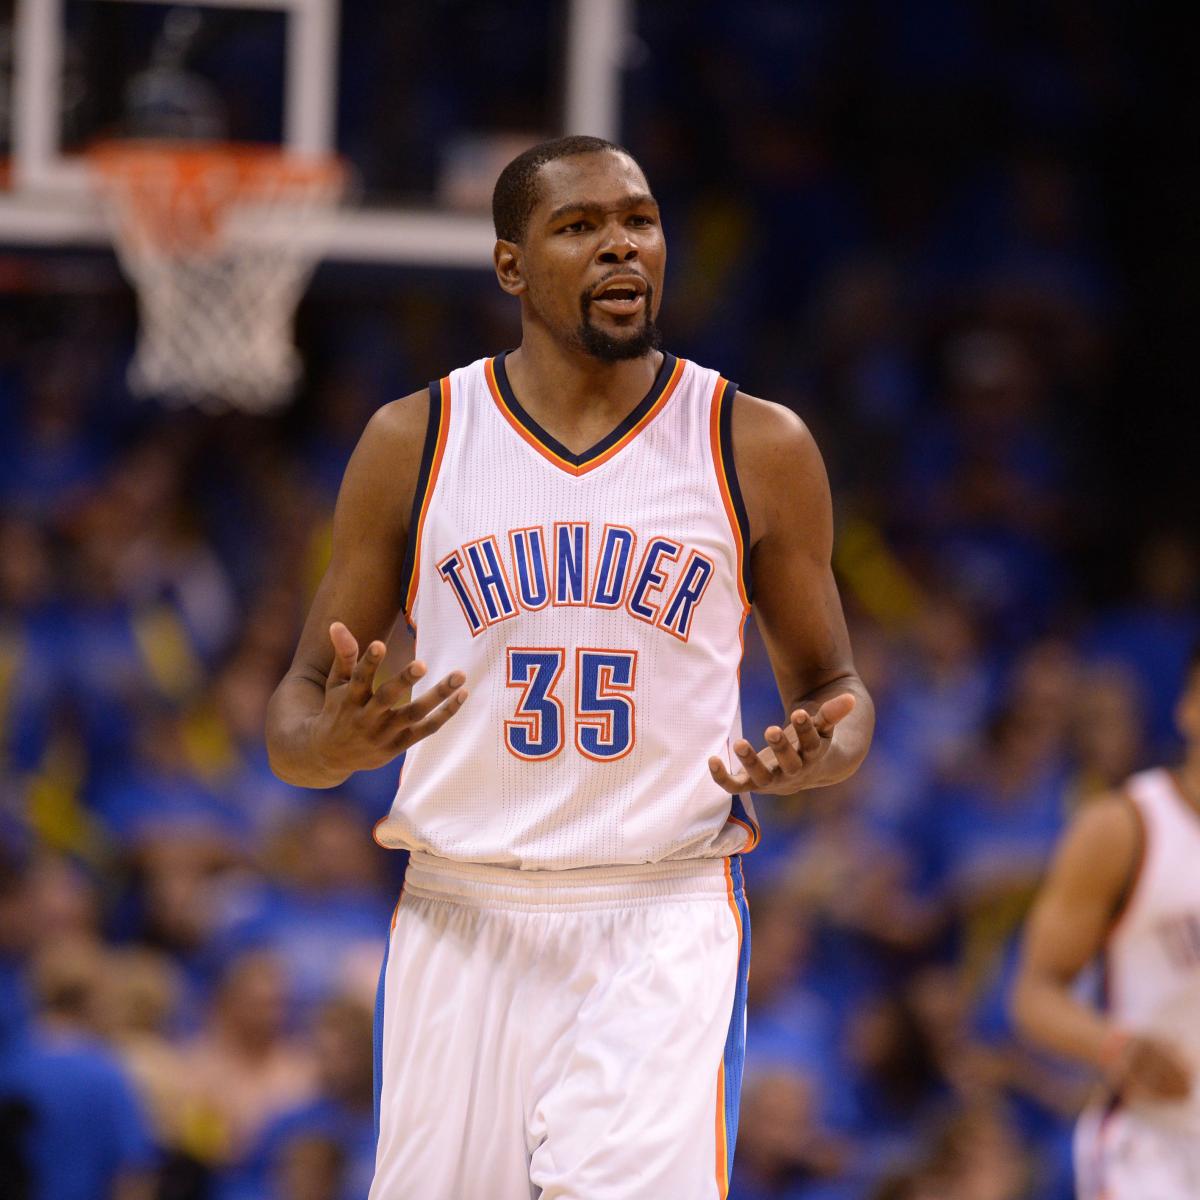 Kevin Durant has a big game to help the Thunder tie series with